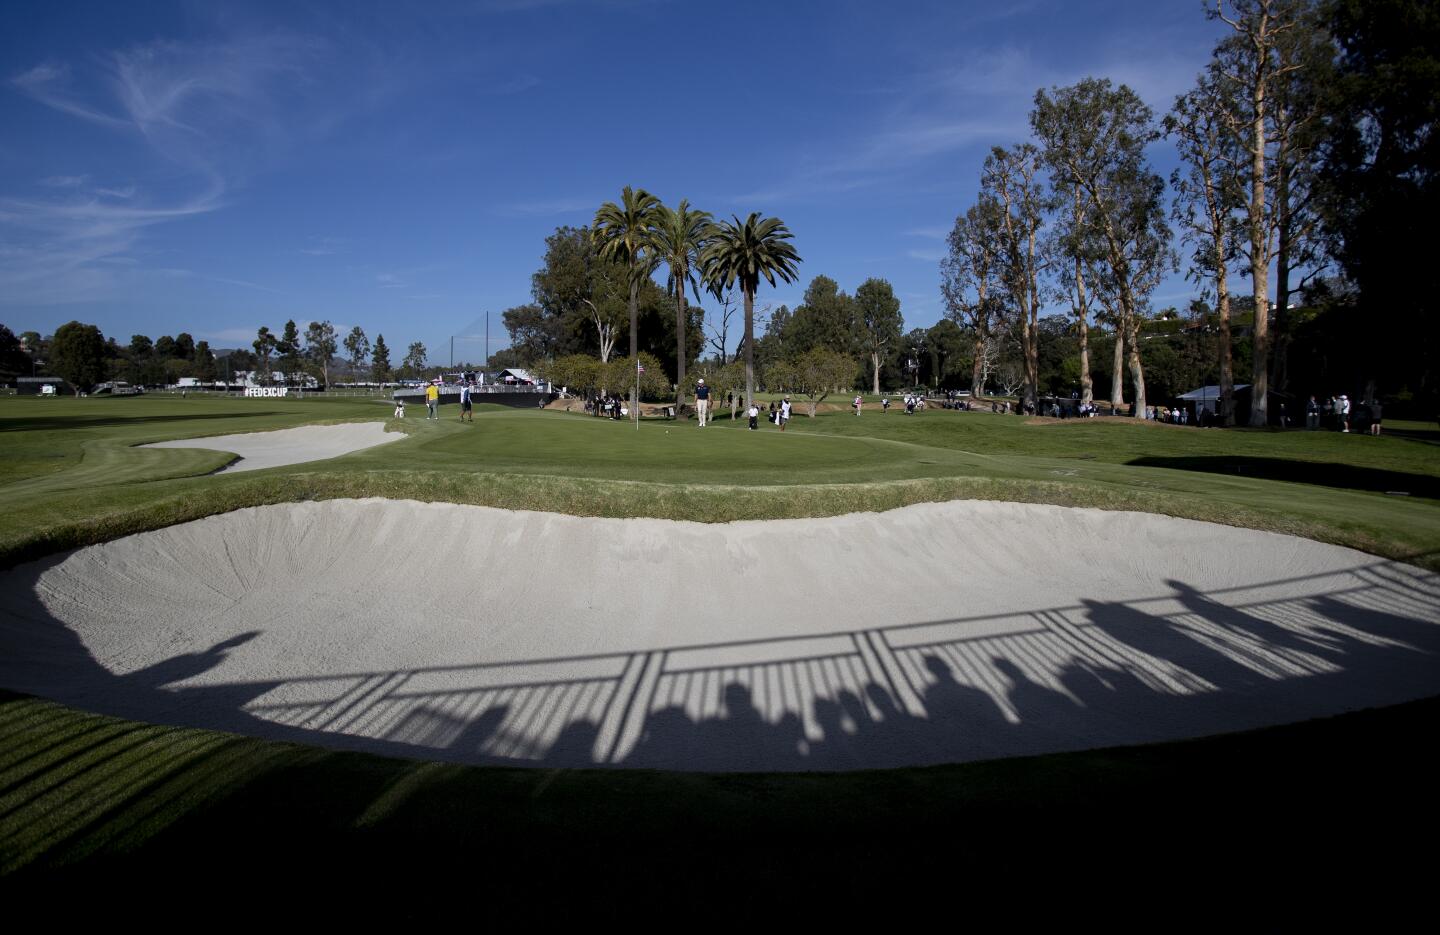 Shadows of fans in the gallery stretch across one of the bunkers on the 10th hole during the first round of the Genesis Invitational at Riviera Country Club on Feb. 13, 2020.